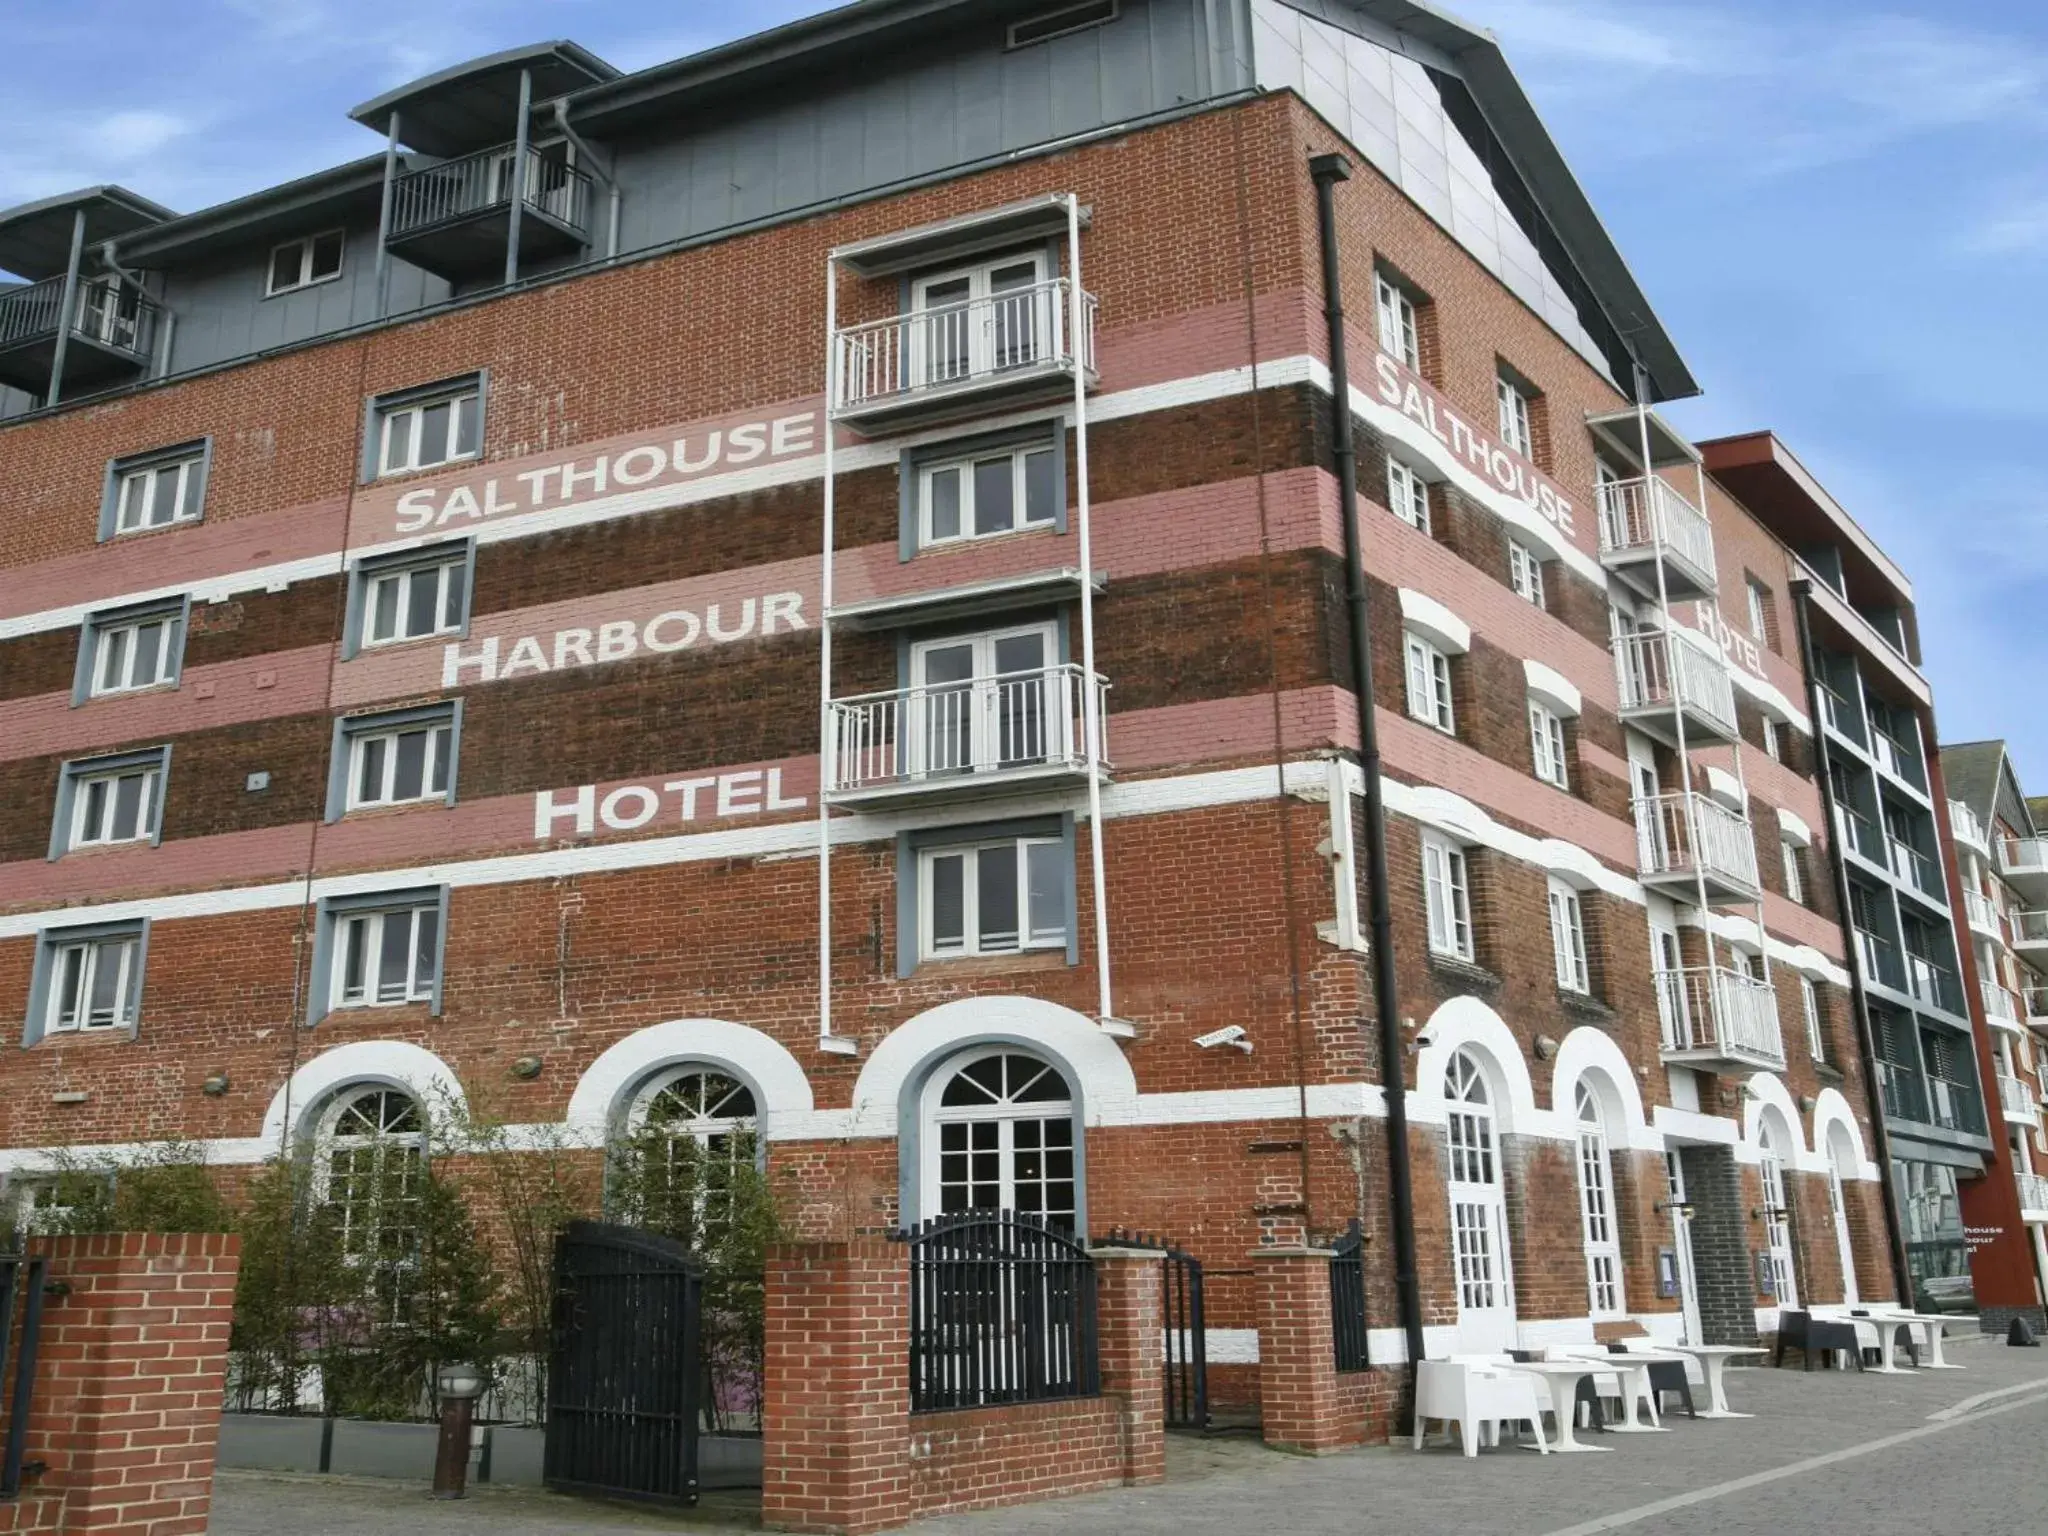 Area and facilities, Property Building in Salthouse Harbour Hotel